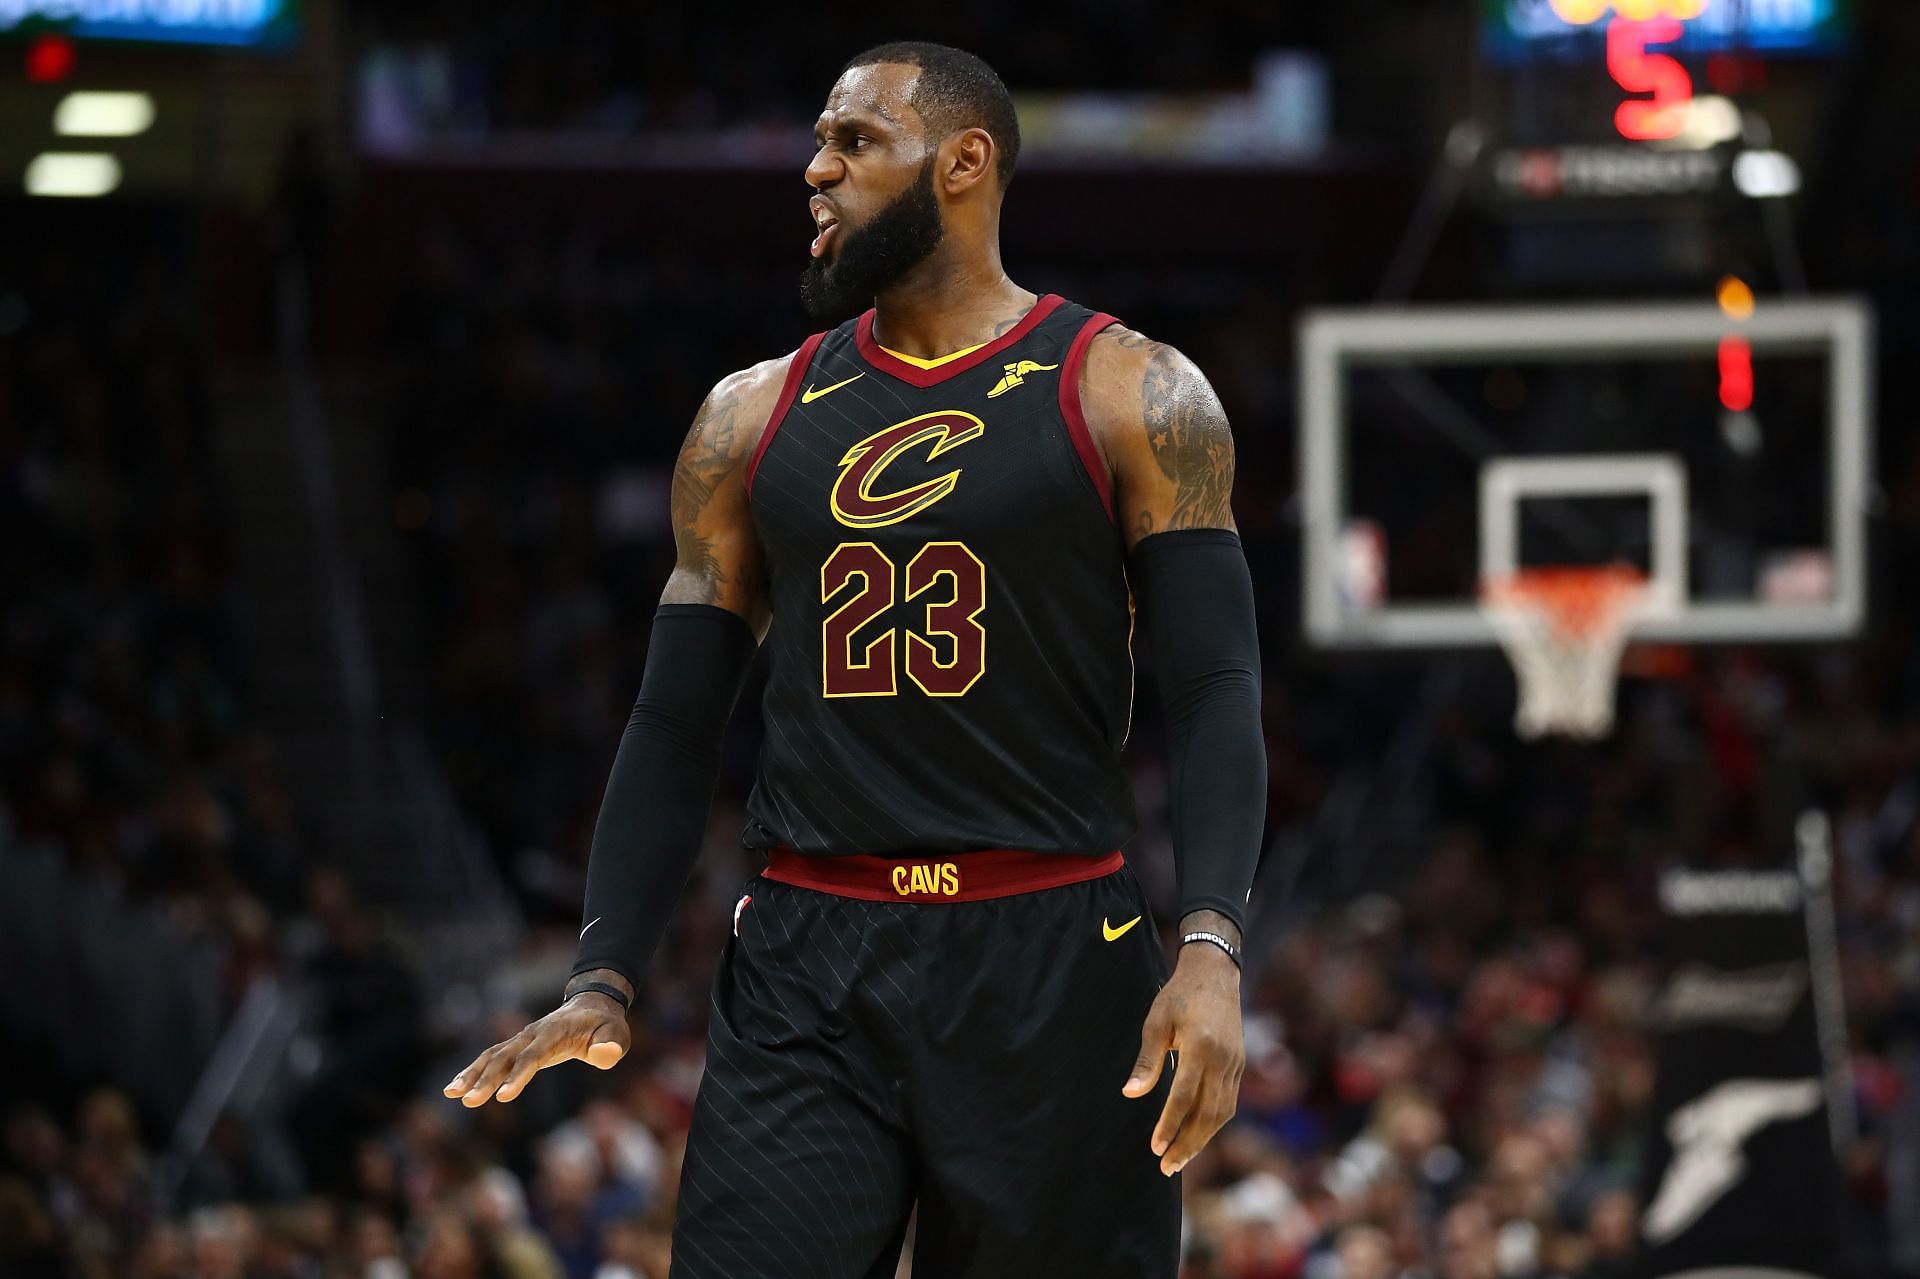 Channing Fyre insists LeBron James would take a pay cut to reunite with the Cleveland Cavaliers